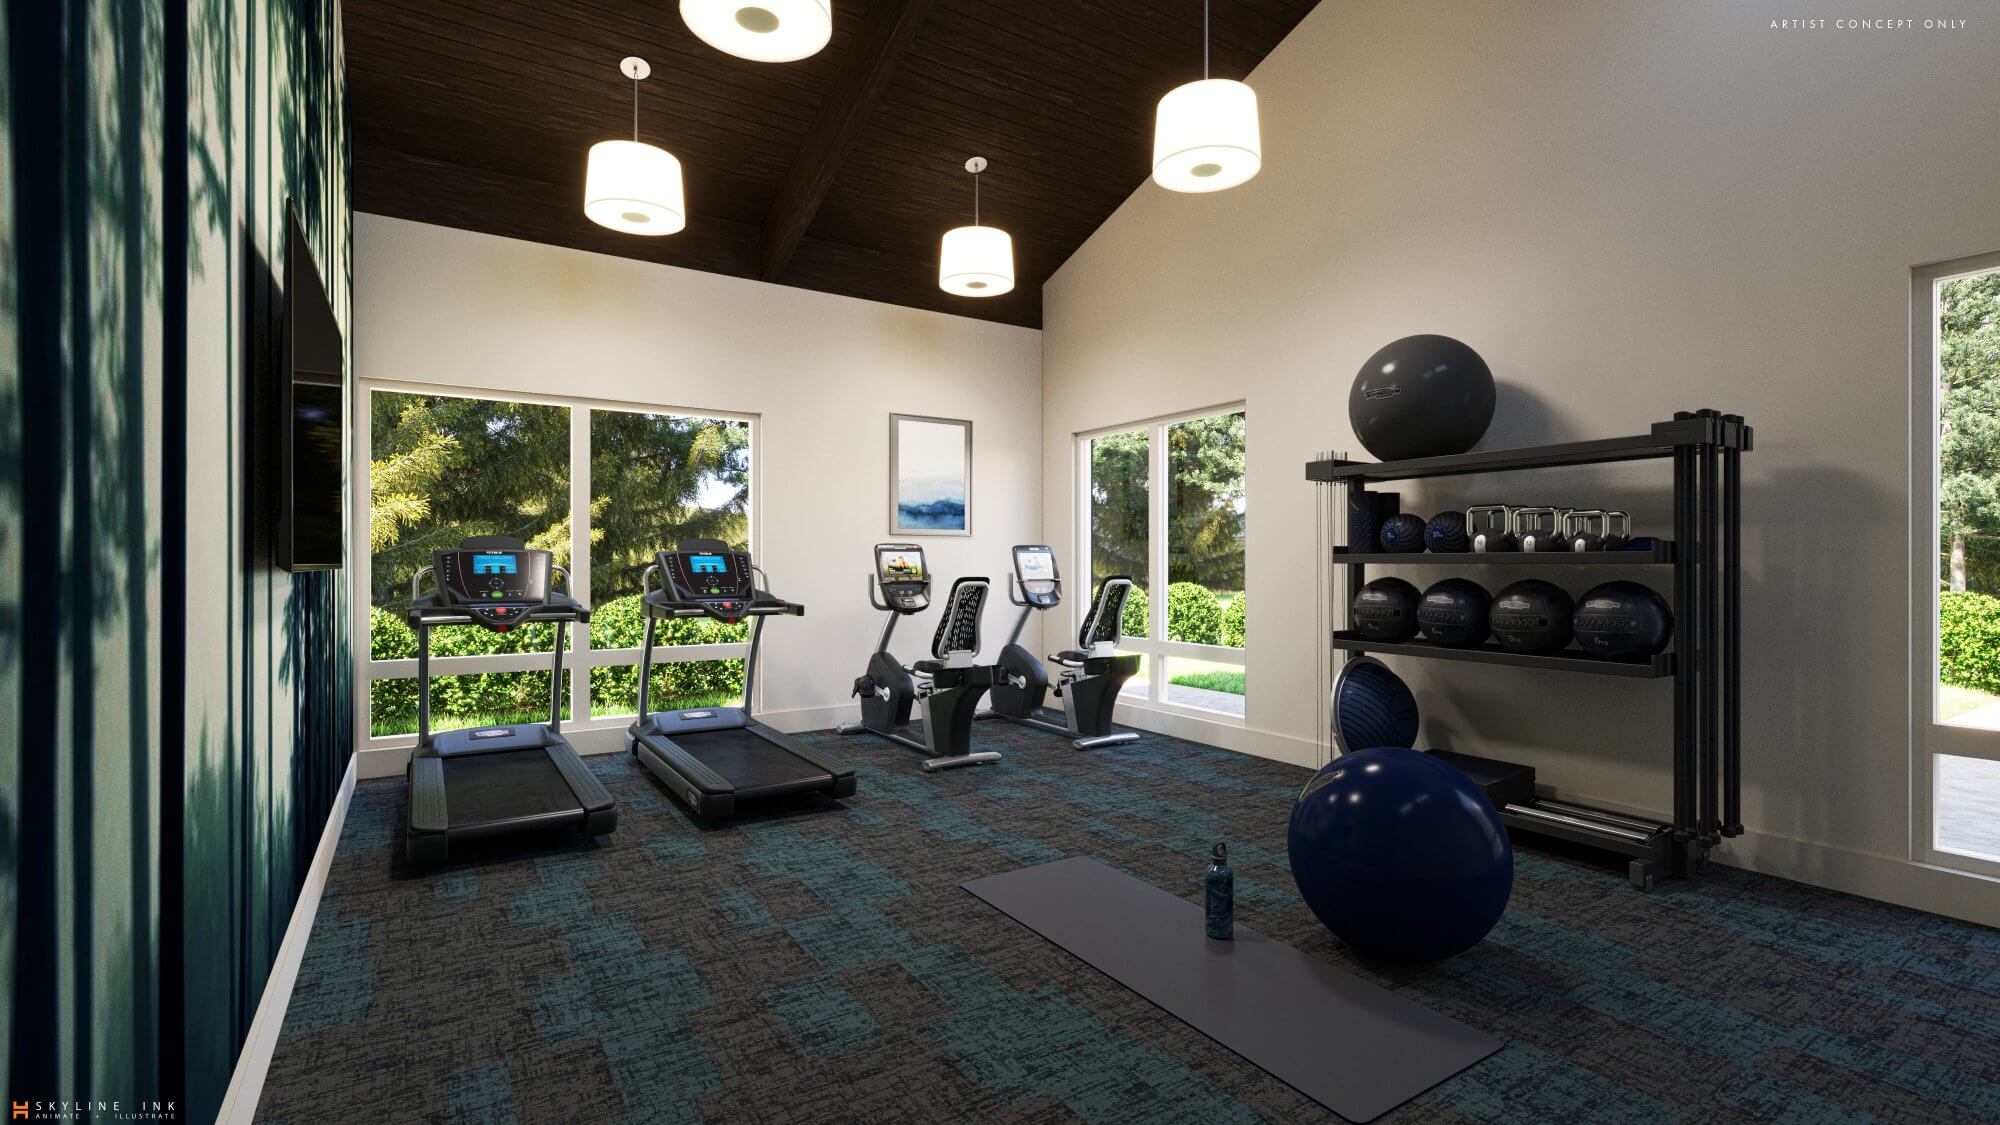 Modern fitness room with dumbells, cardio machines and other equipment.